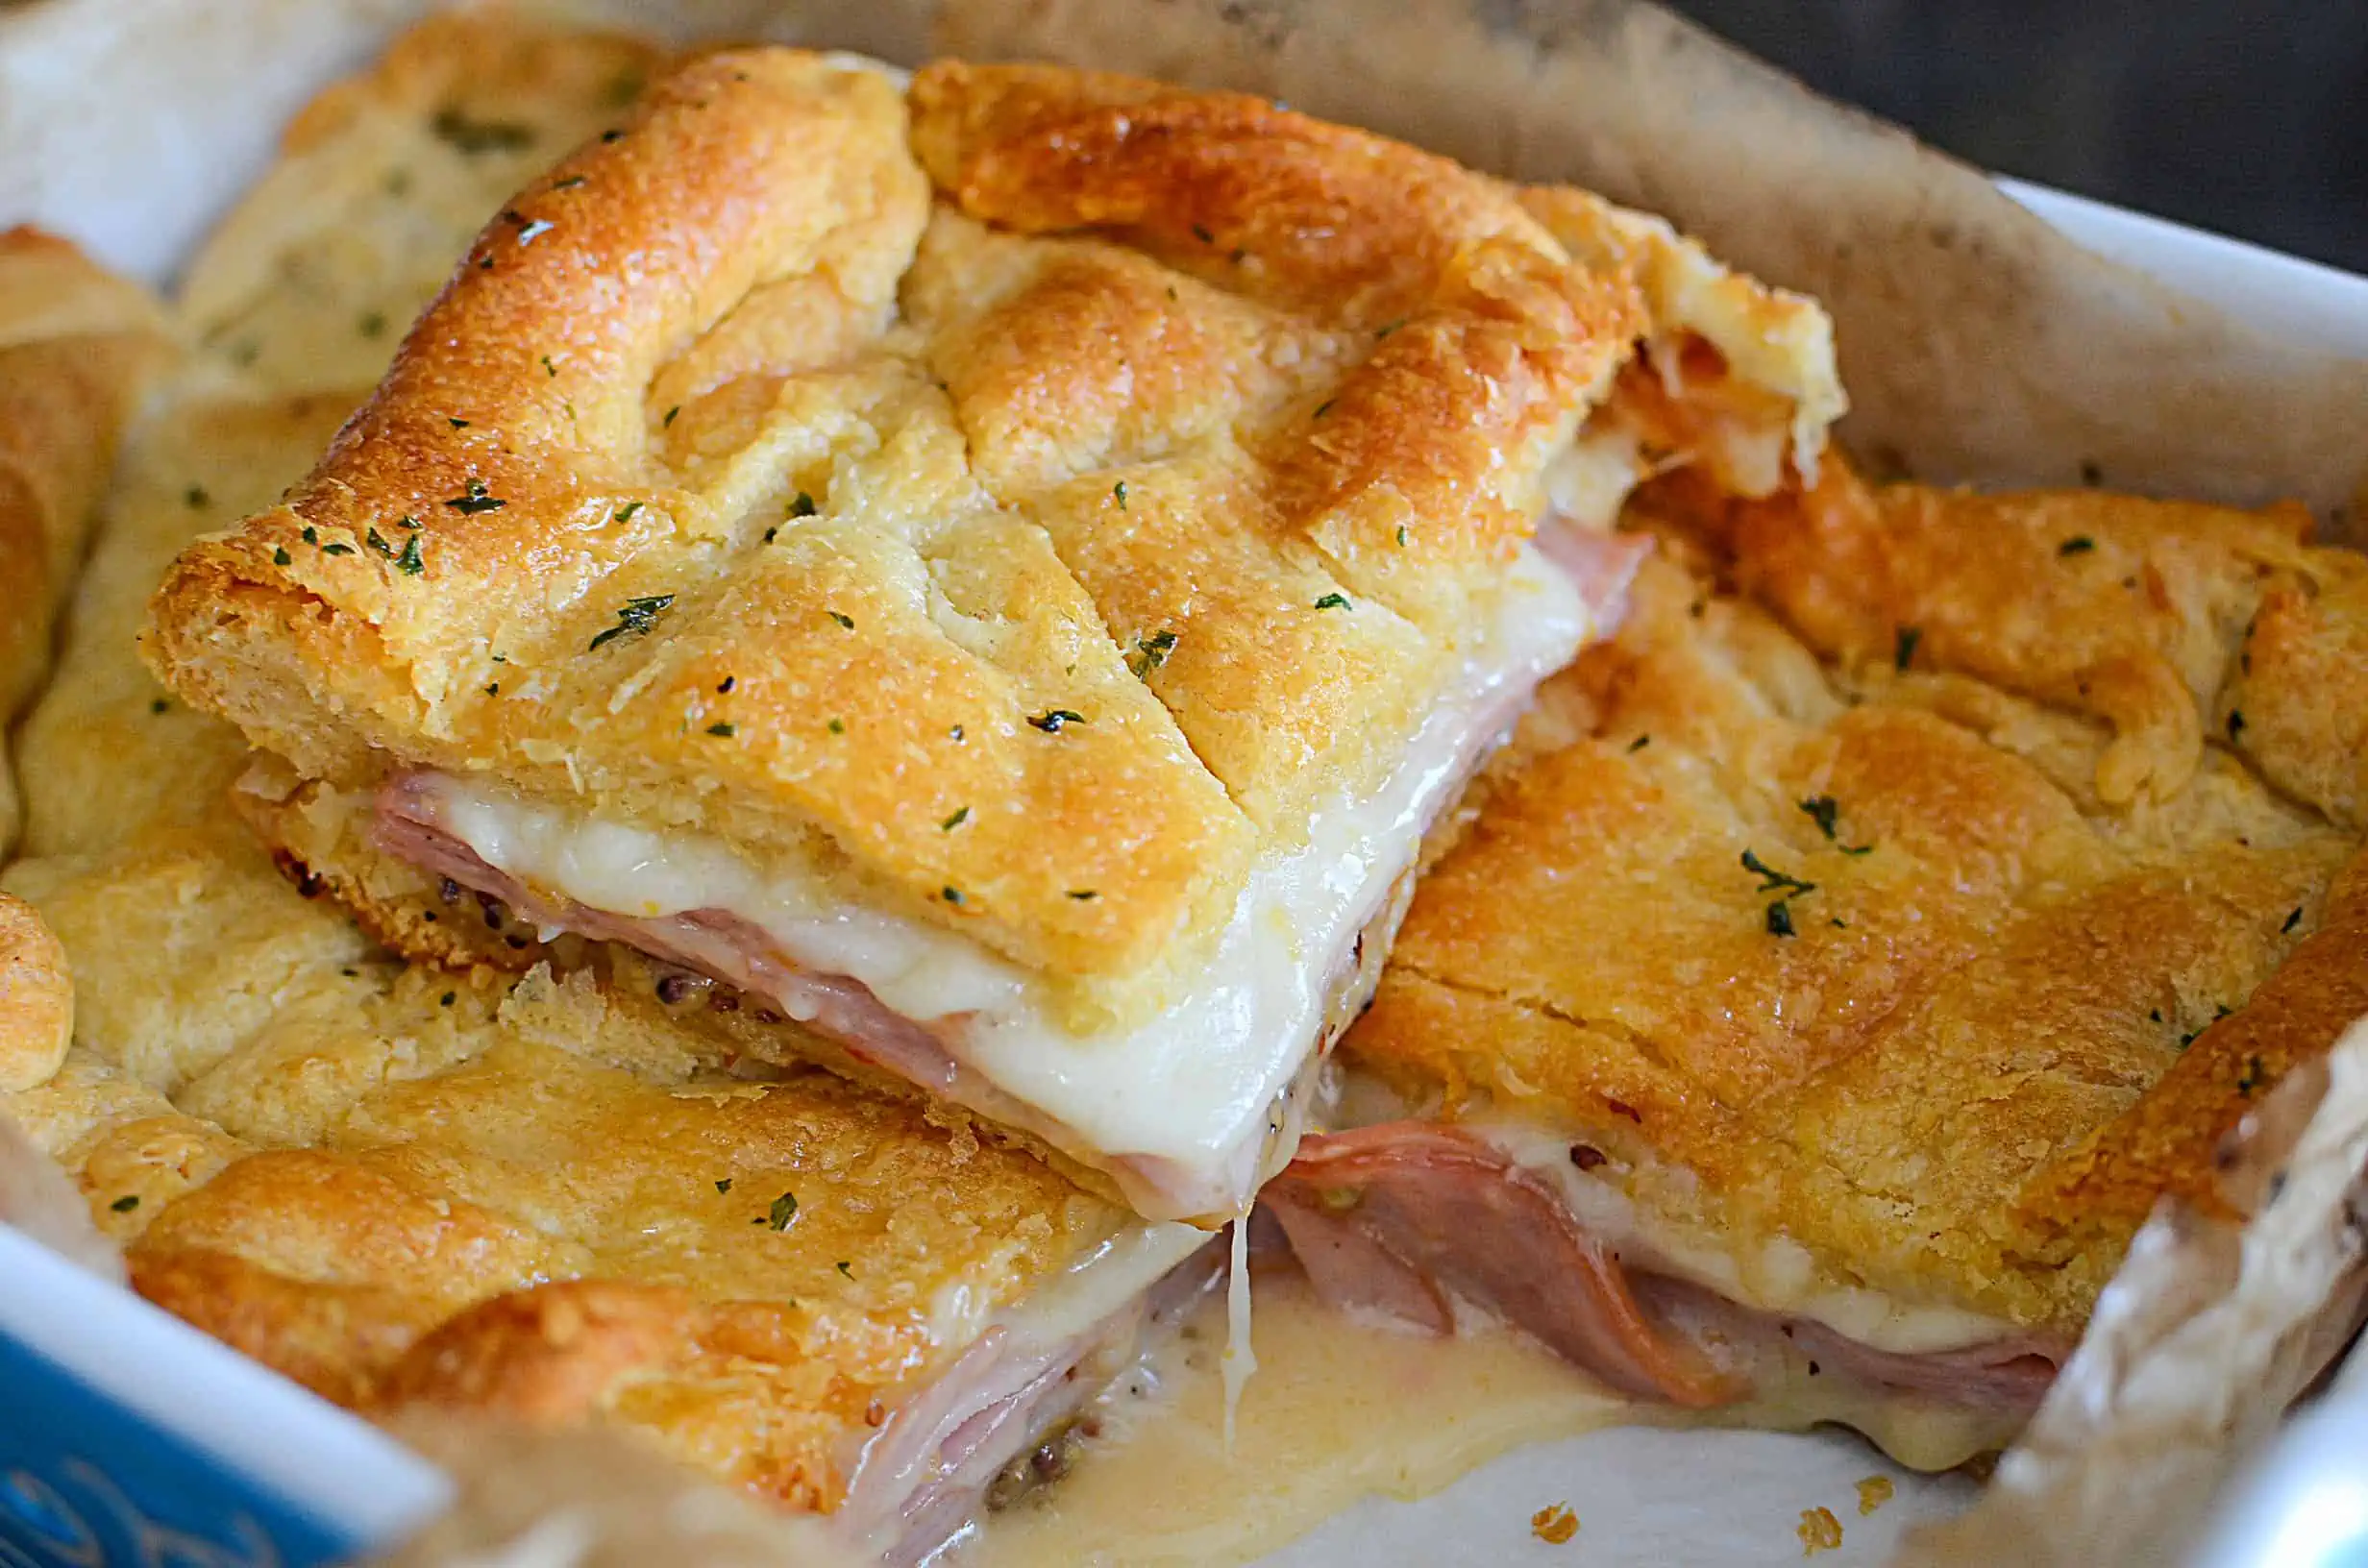 A hot ham and cheese sandwich fresh from the oven, laying on top of the other sandwiches.